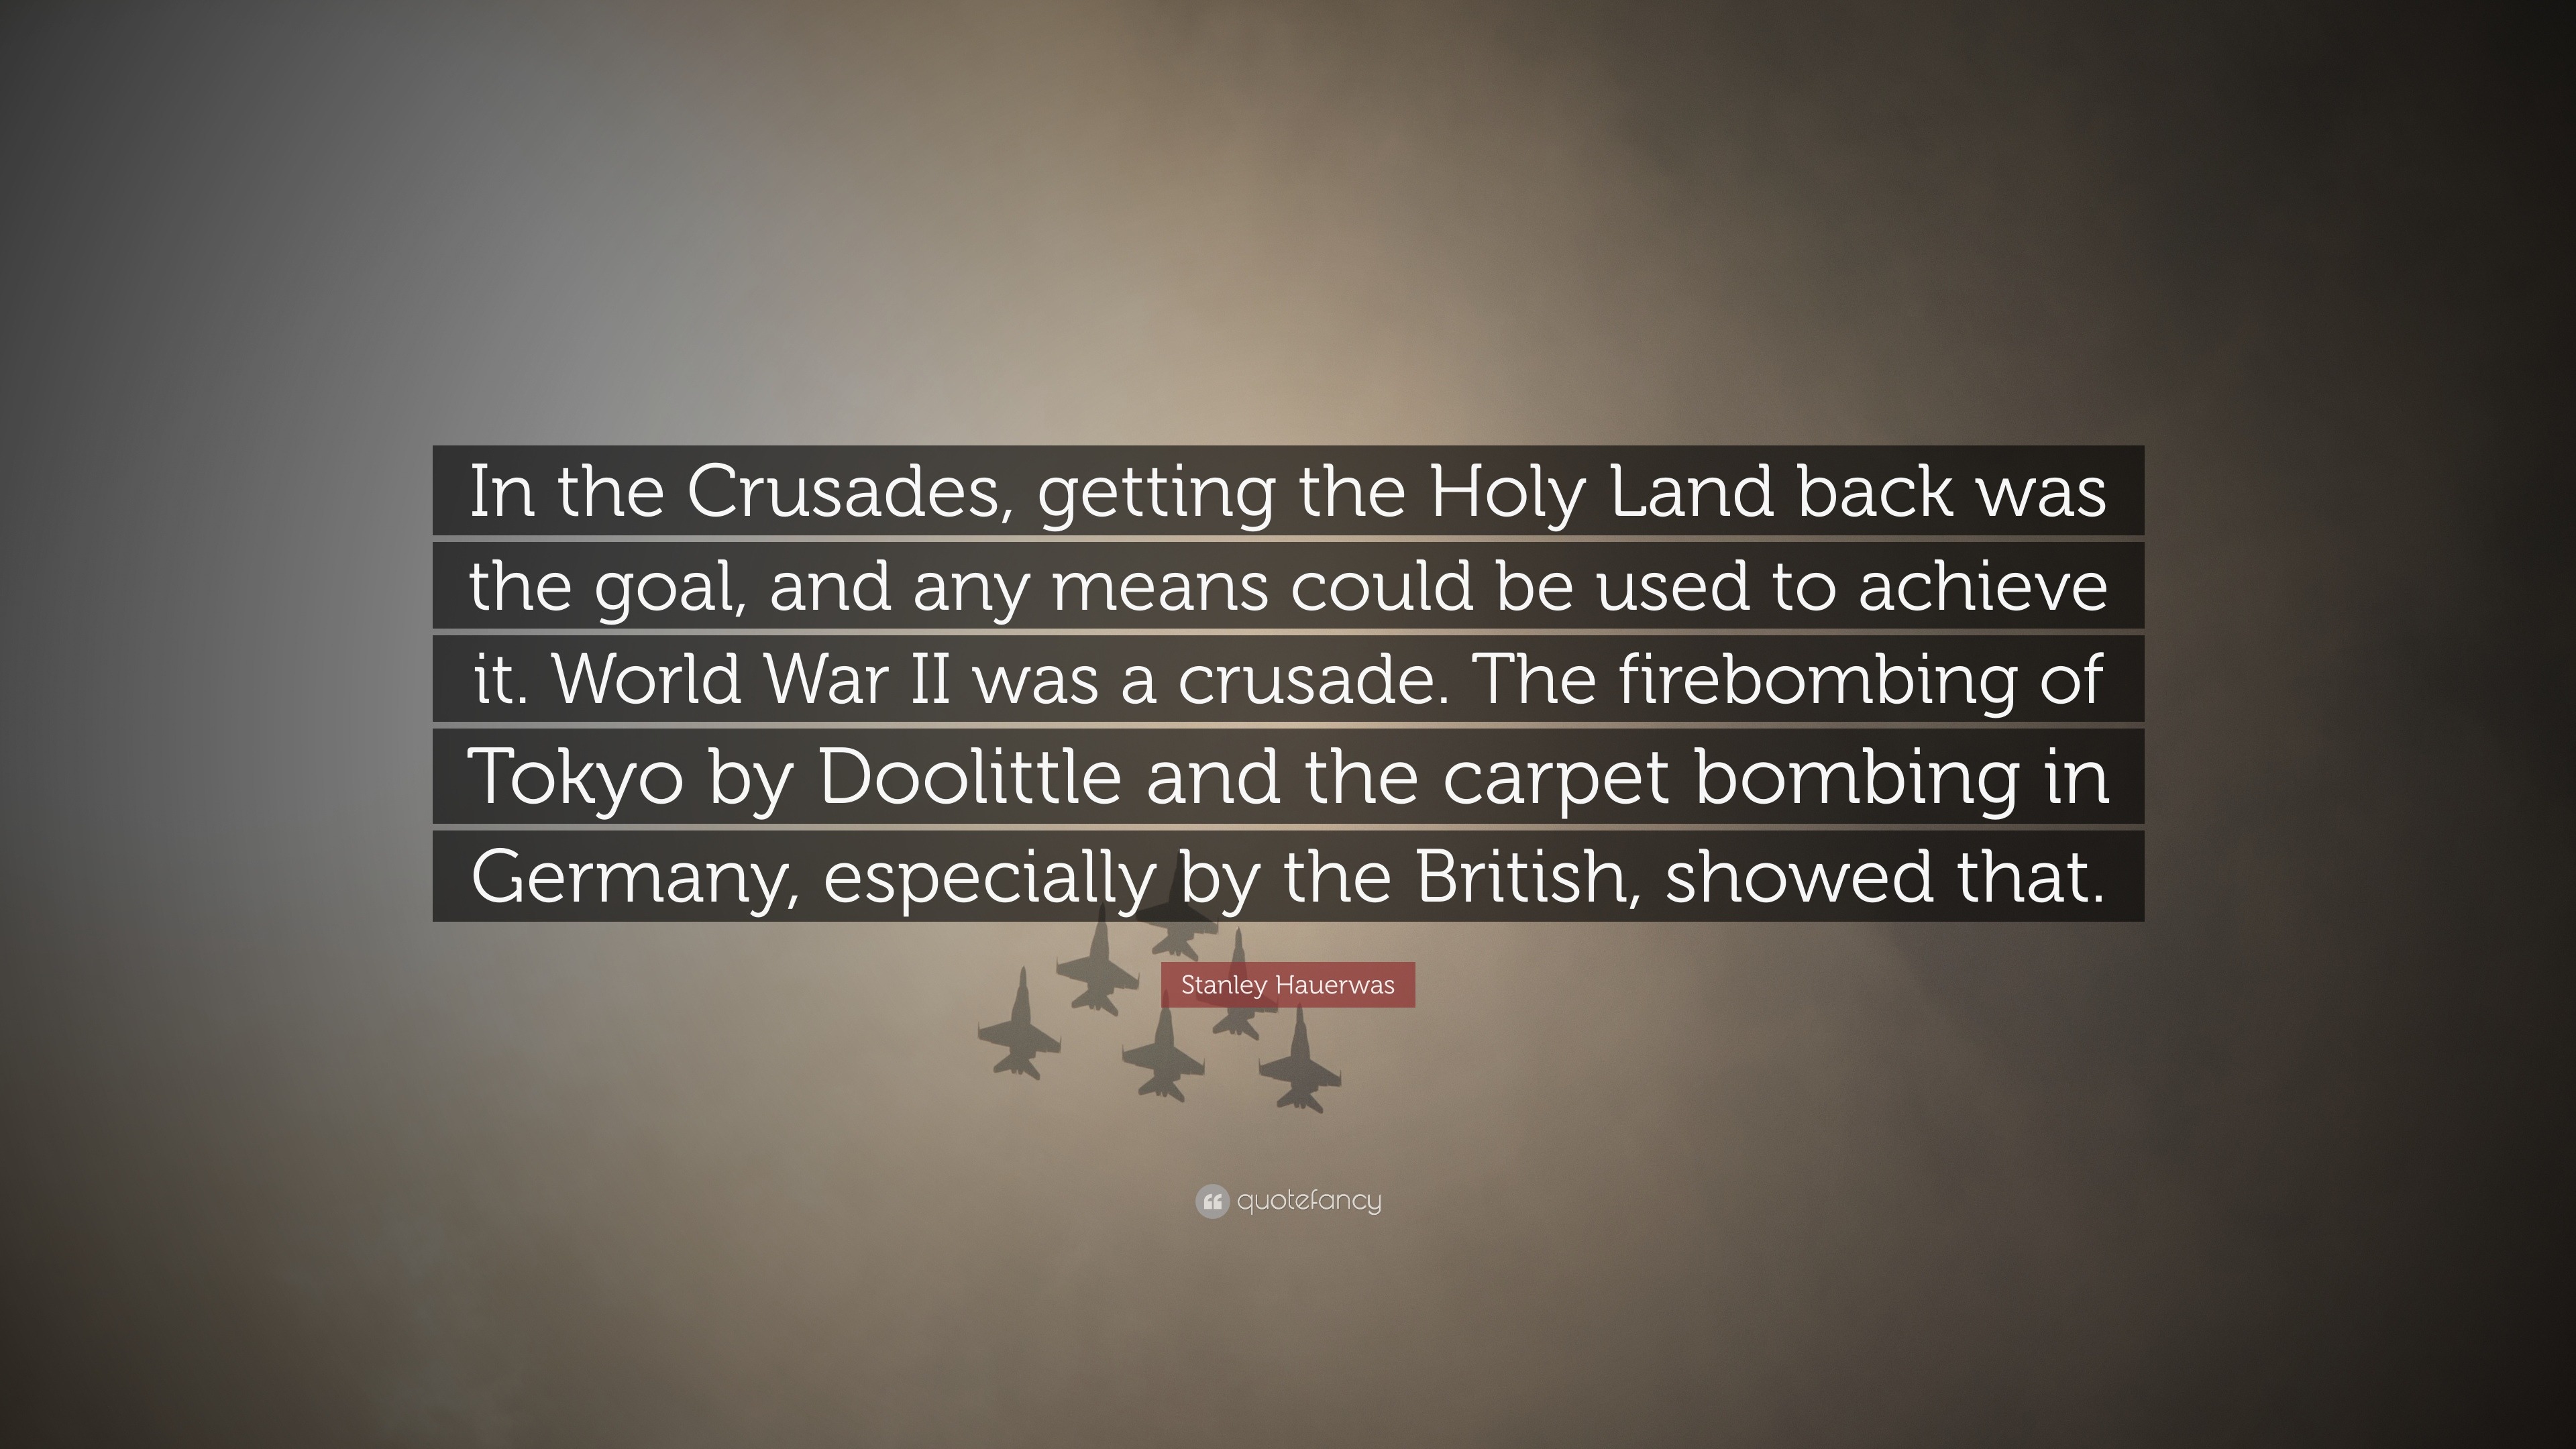 what was the goal of the crusades